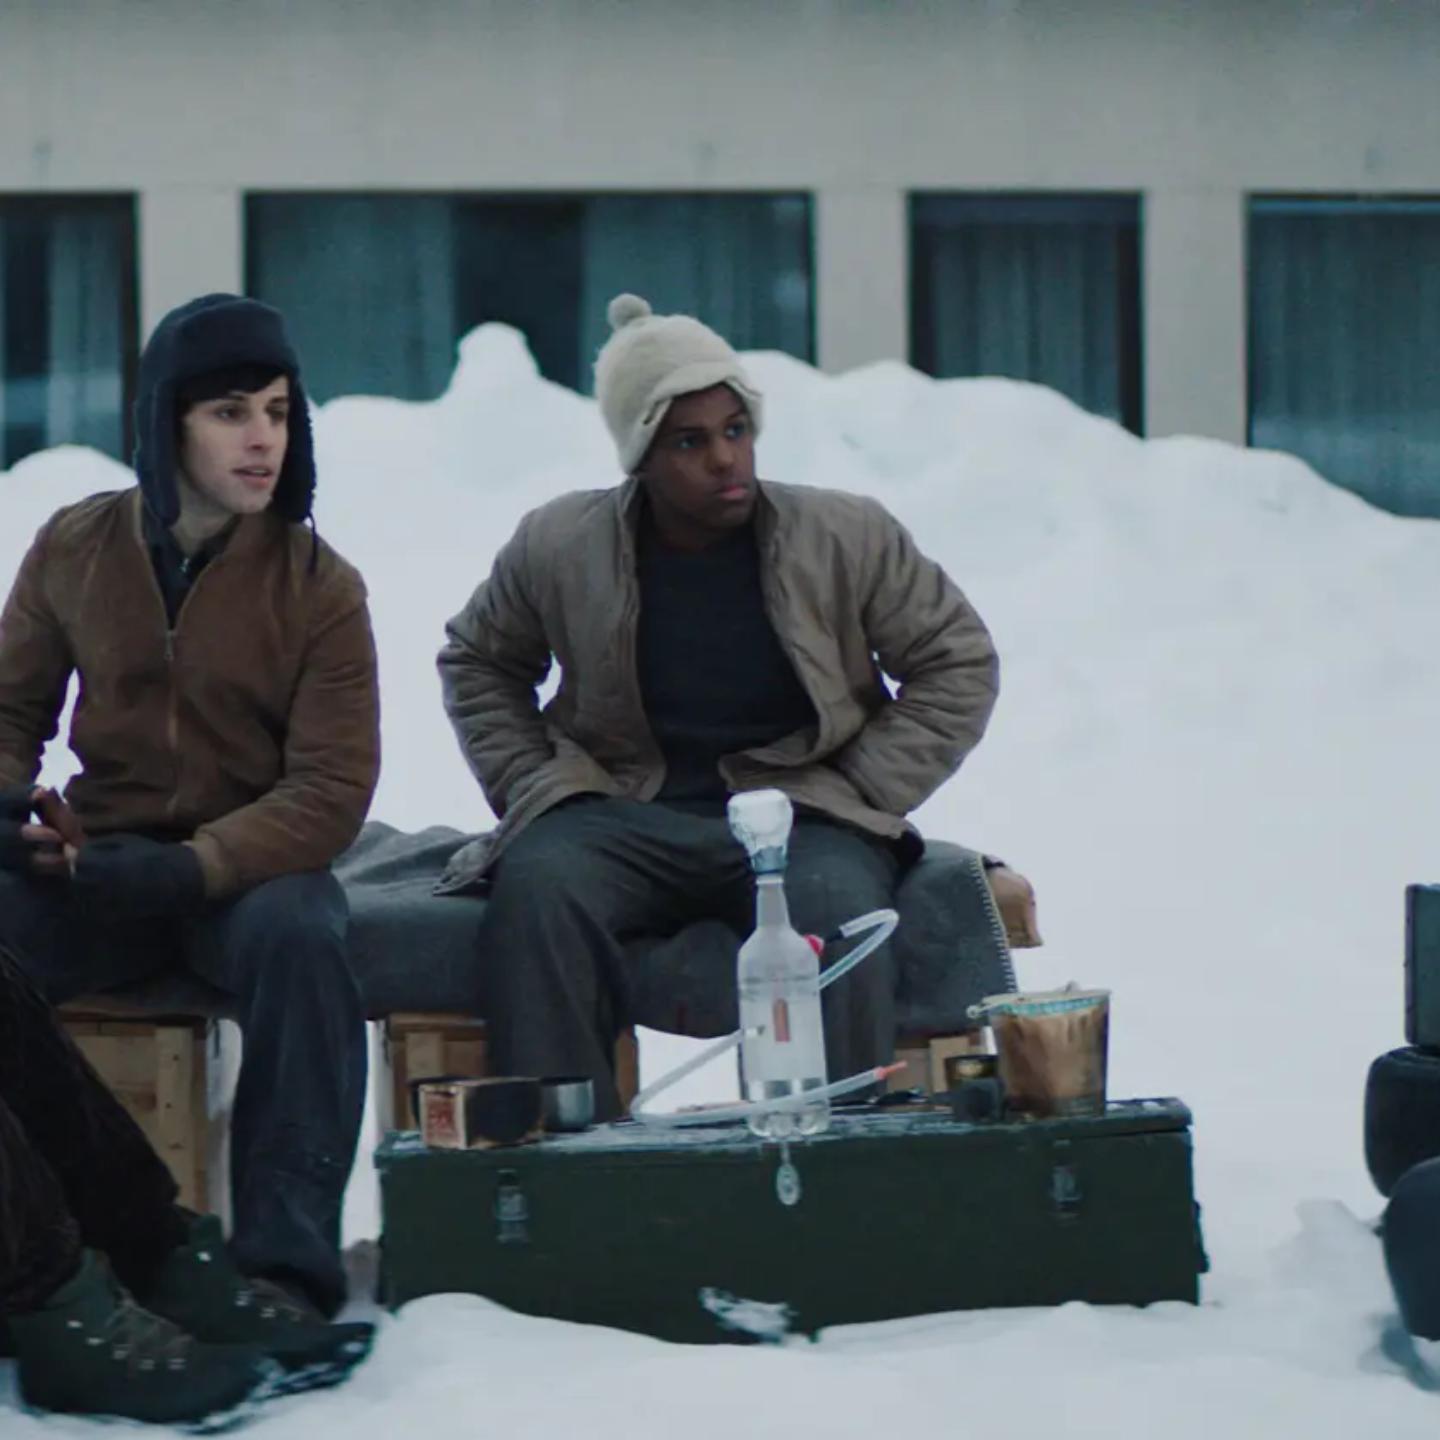 a group of men sitting on a bench in the snow